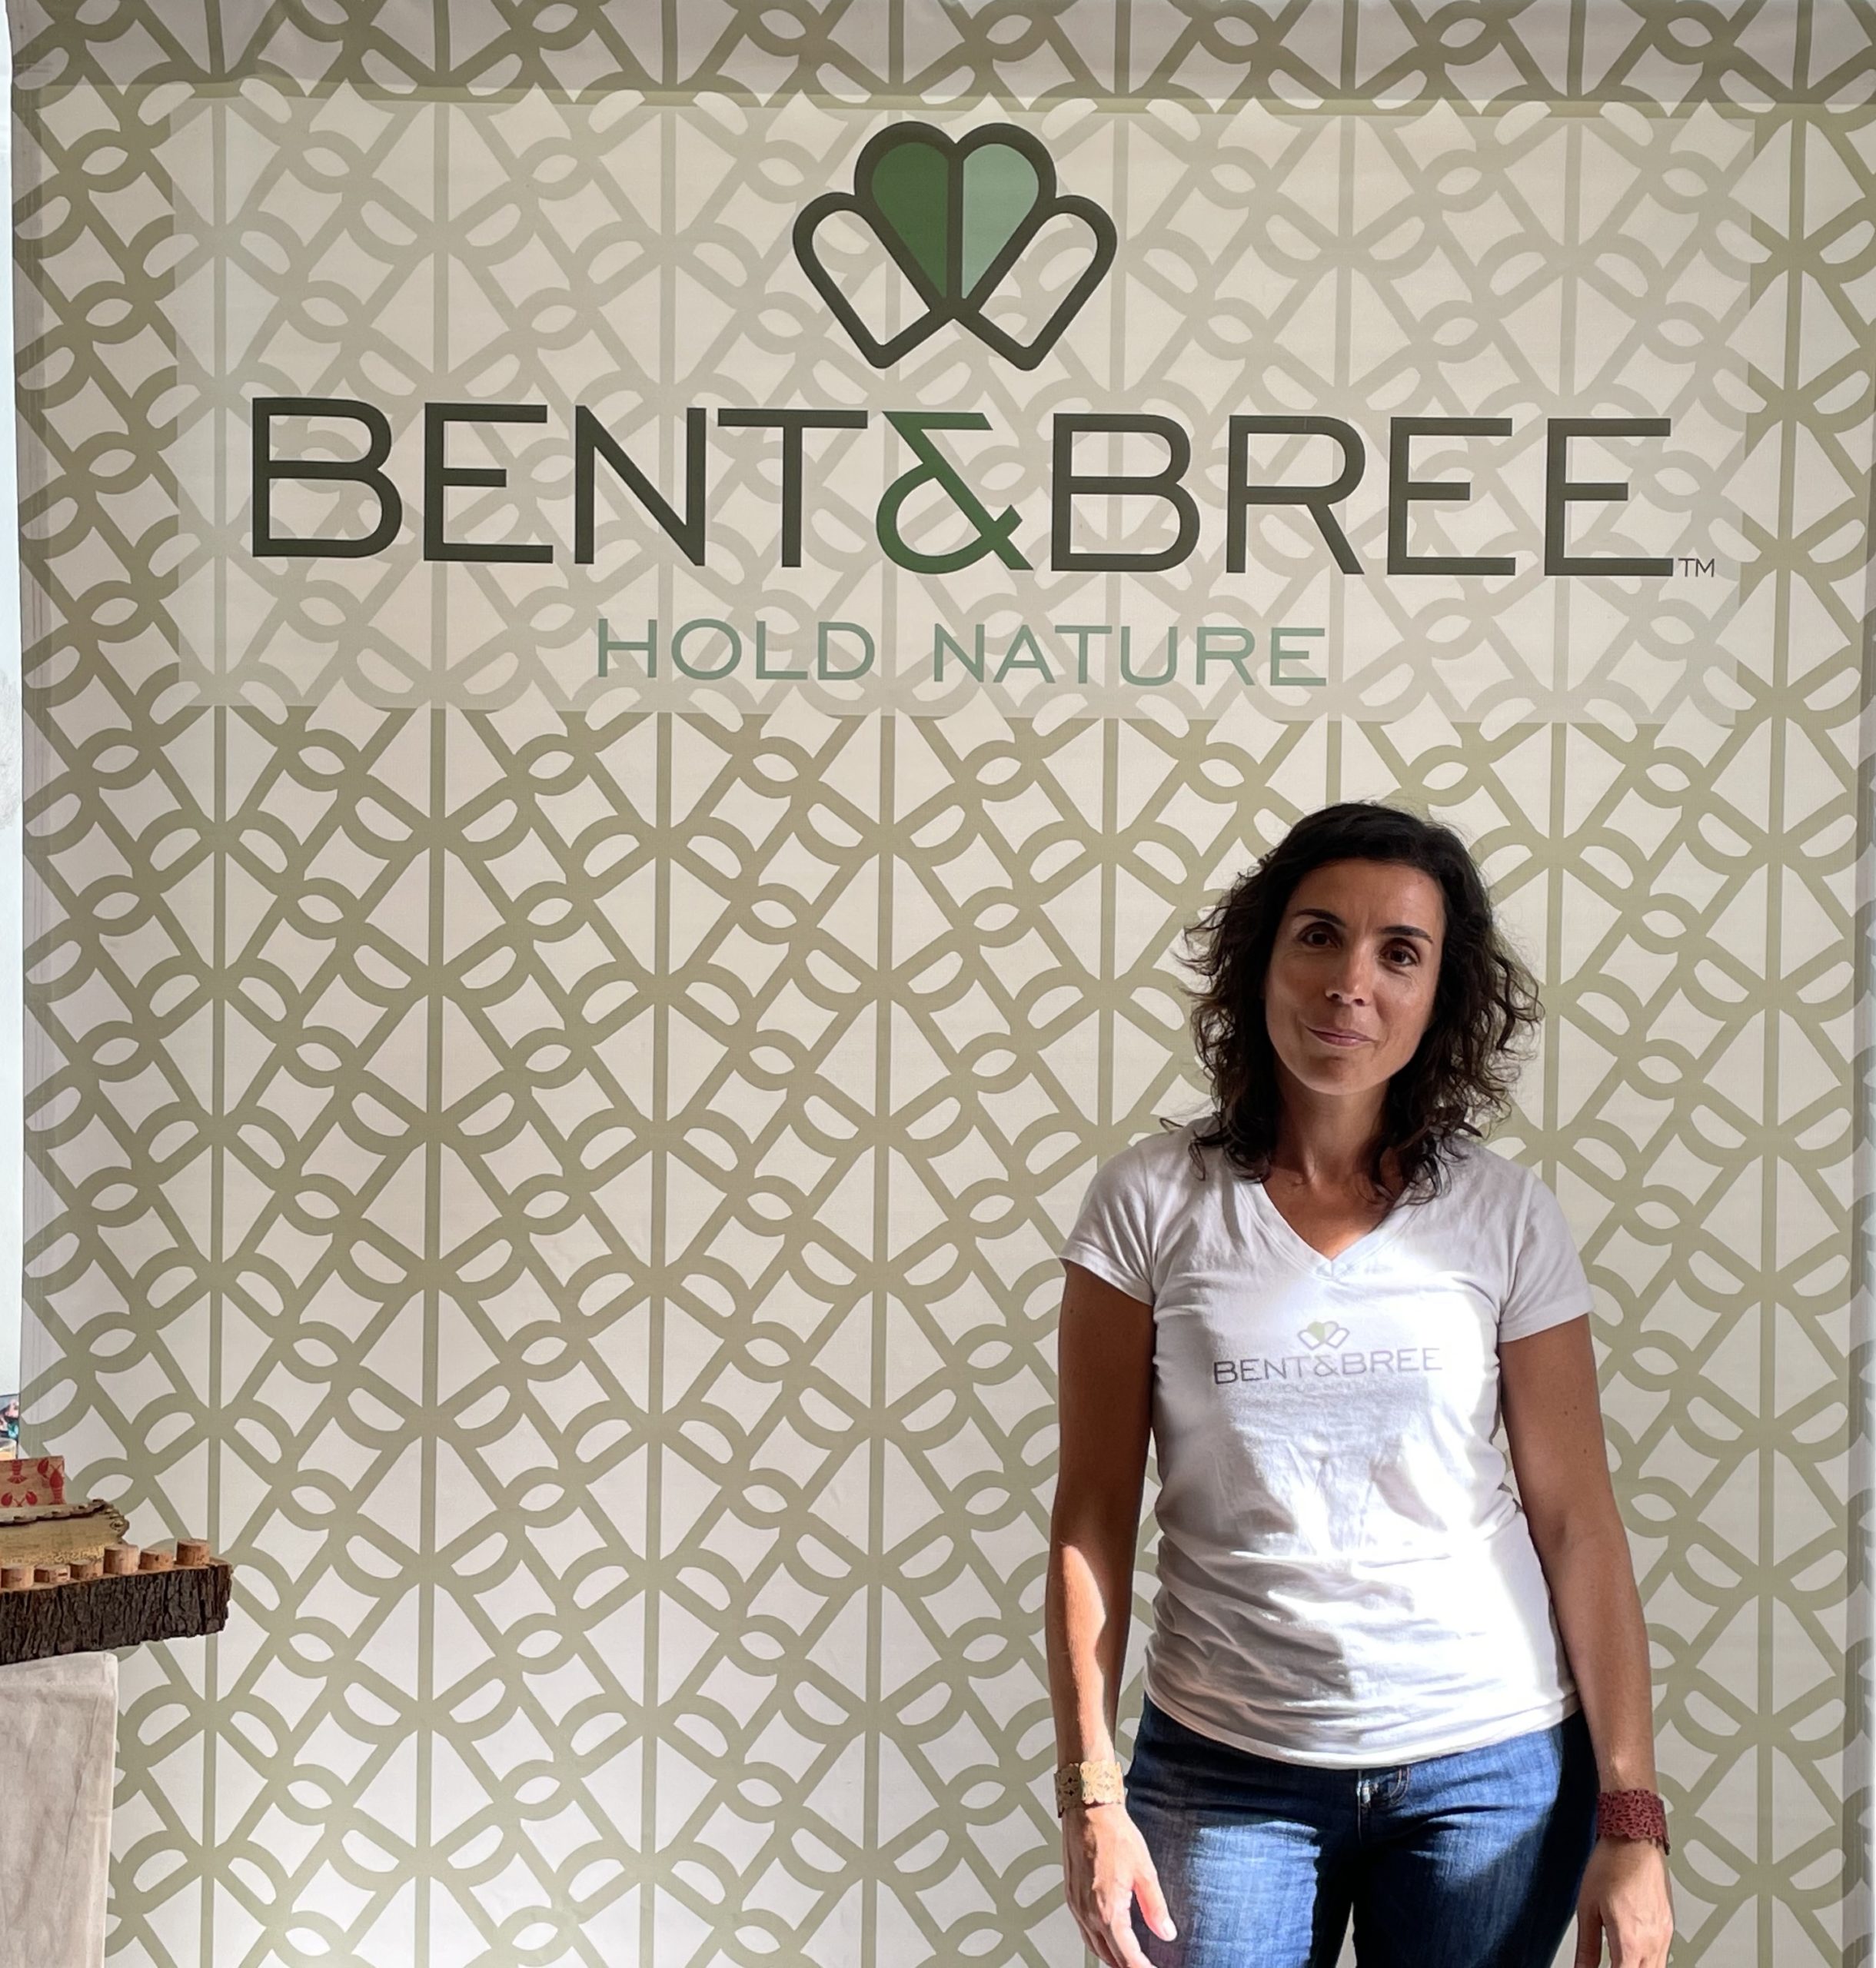 Founder of Bent and Bree